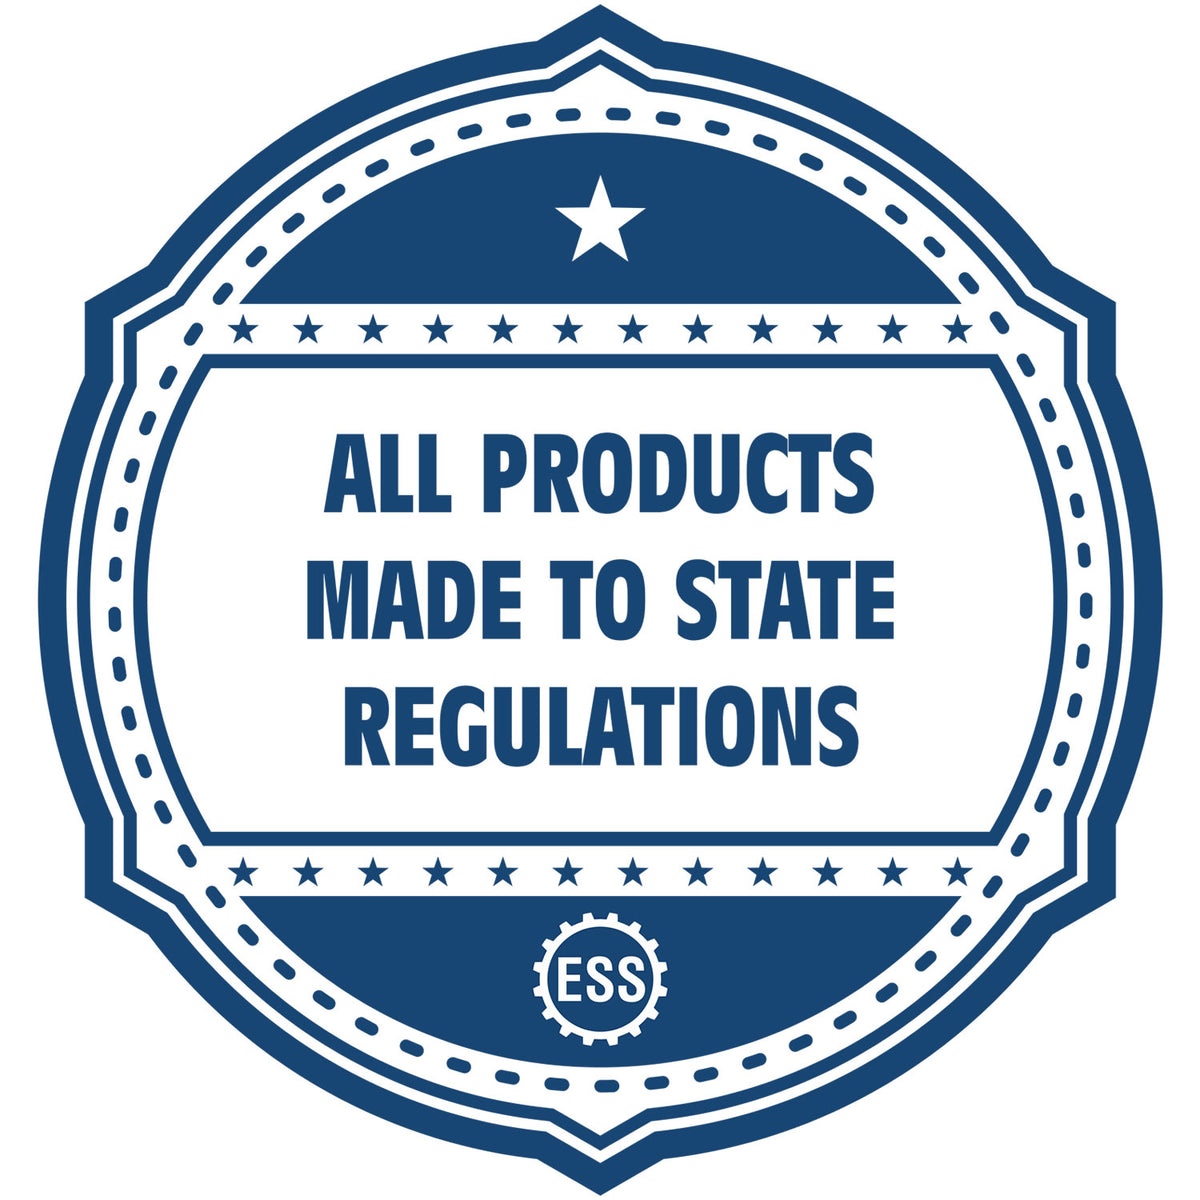 An icon or badge element for the Heavy Duty Cast Iron New York Engineer Seal Embosser showing that this product is made in compliance with state regulations.